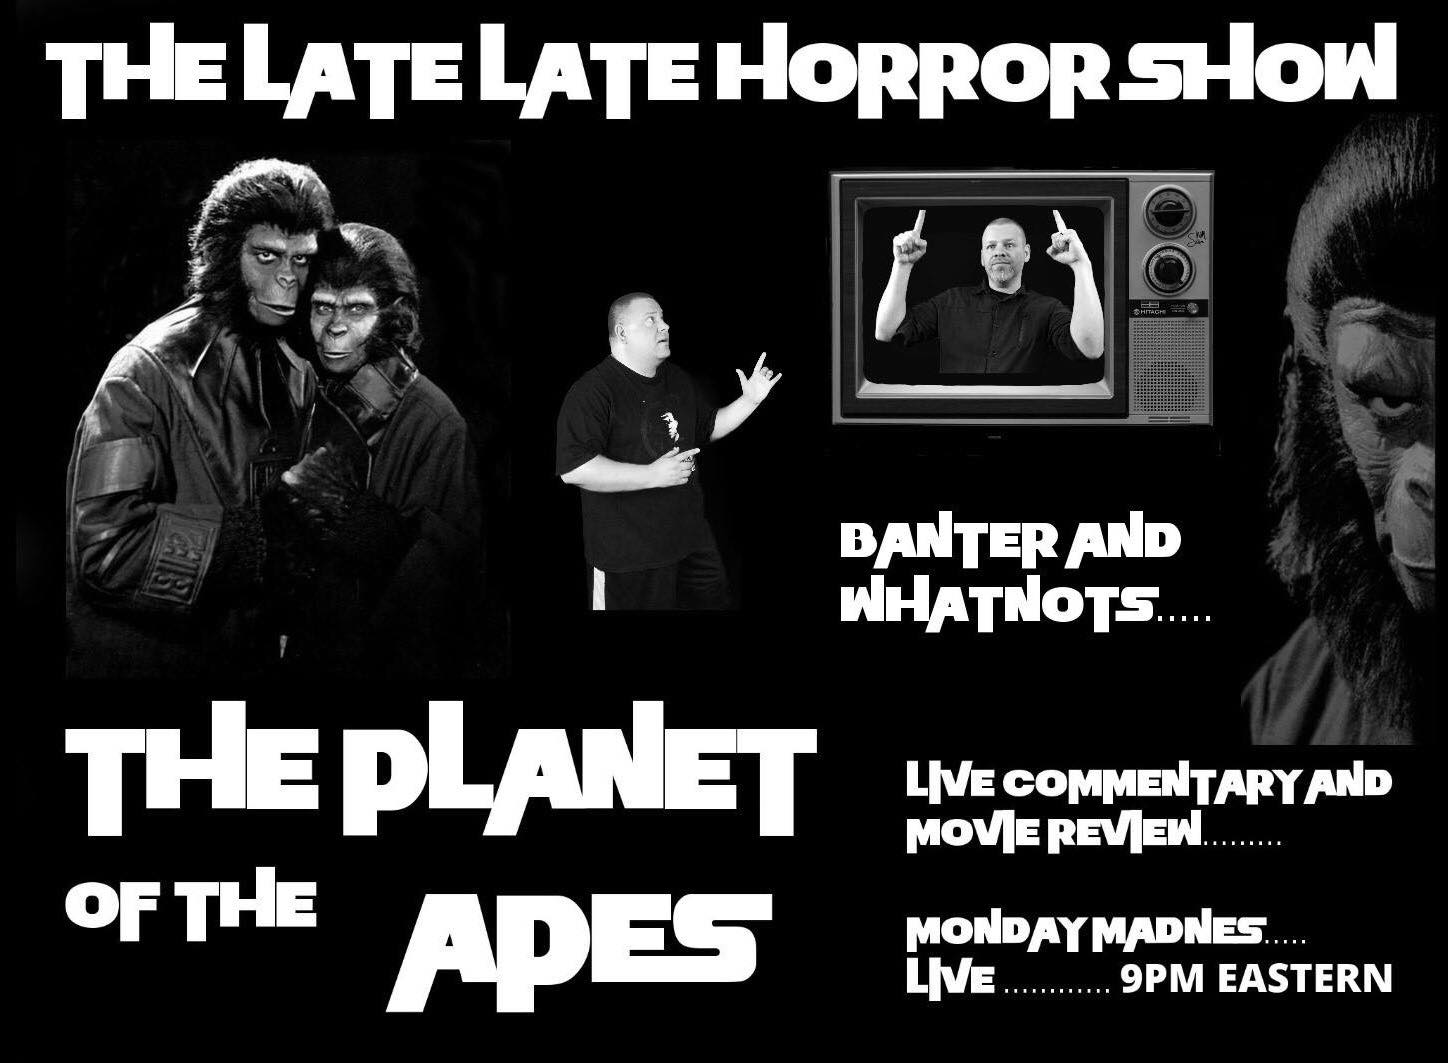 MONDAY MADNESS The Planet Of The Apes 1968 Commentary Banter 